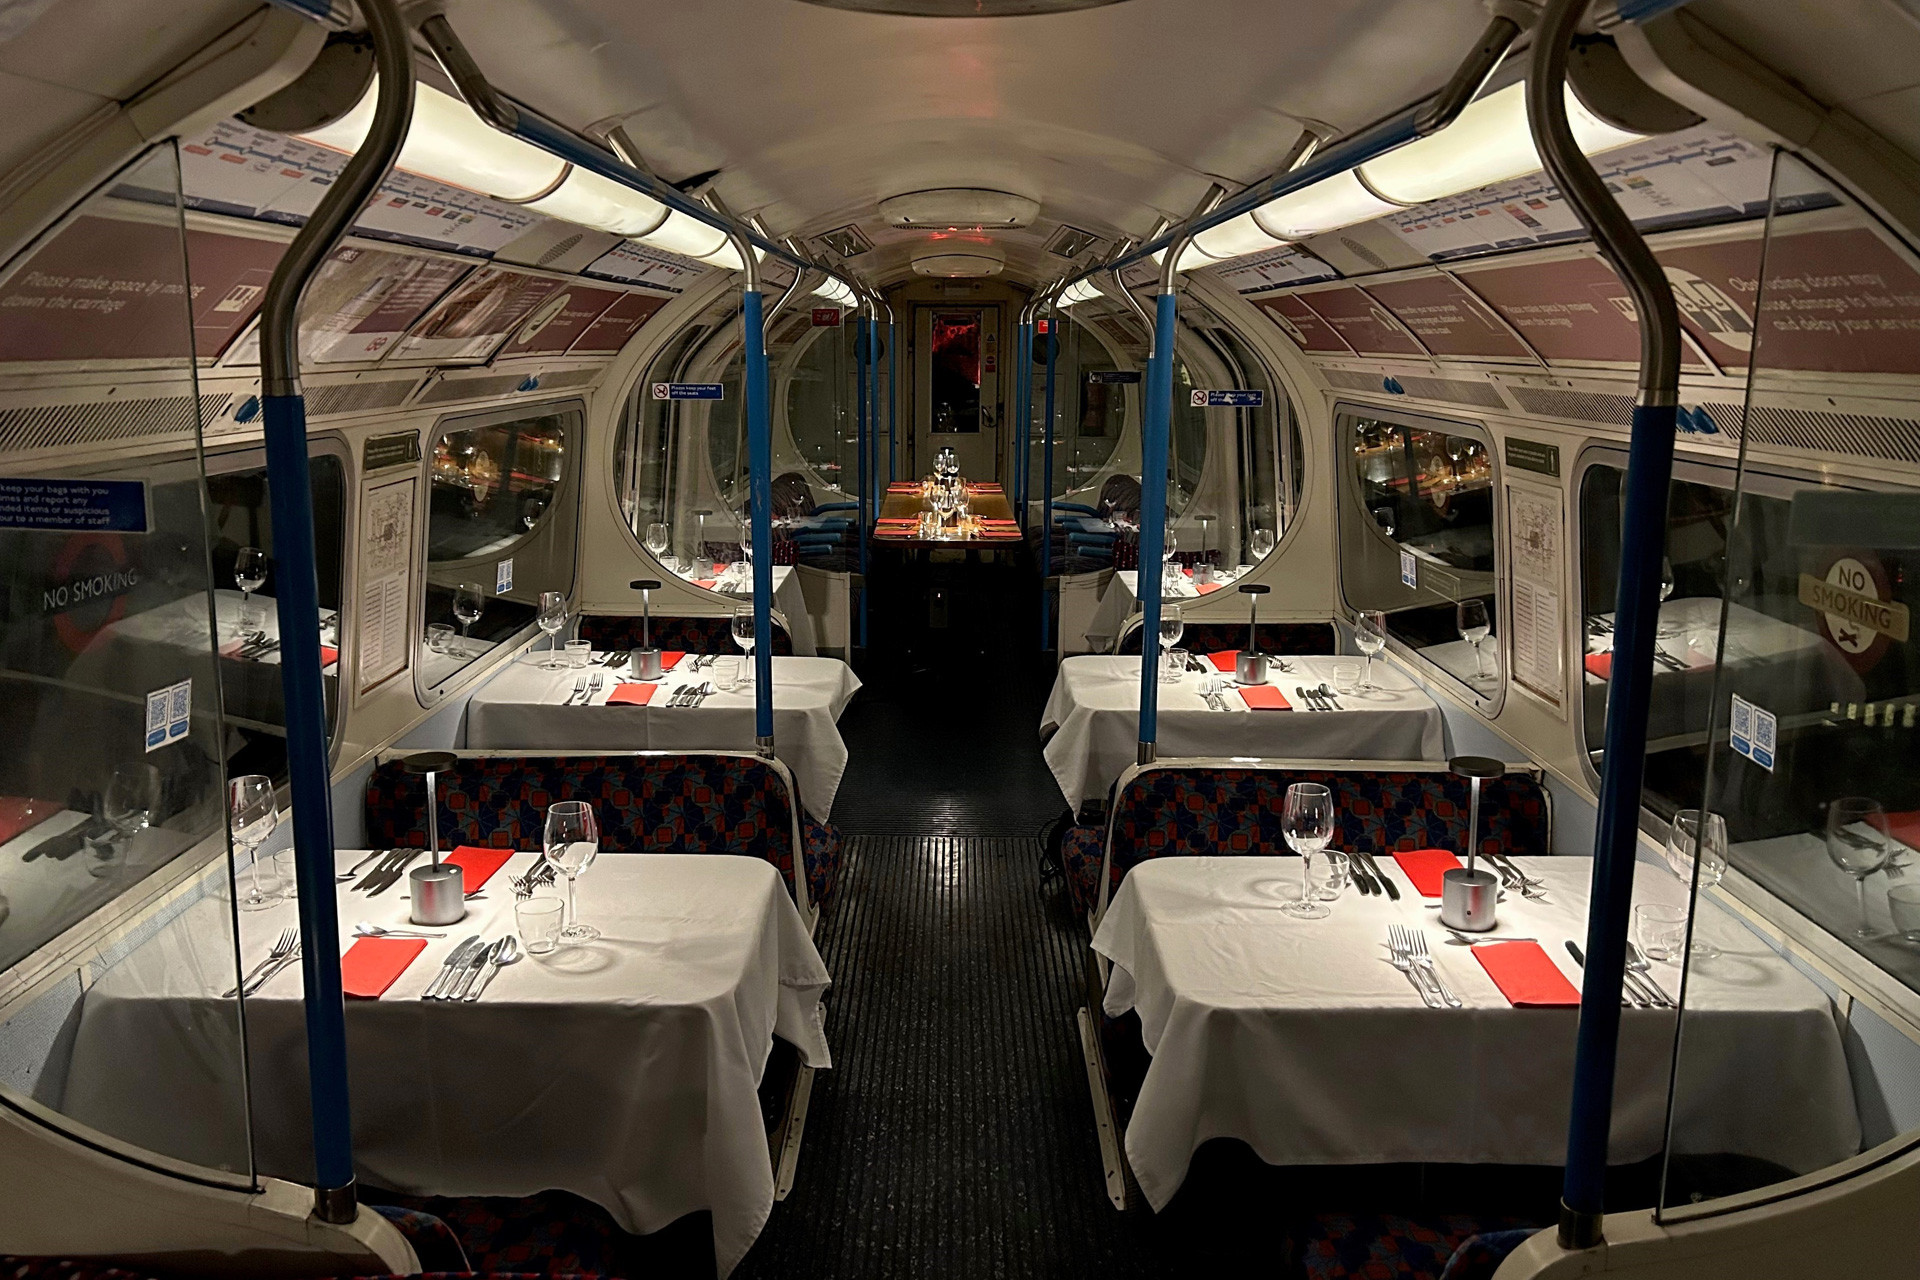 Pop-up dining experience on a tube carriage